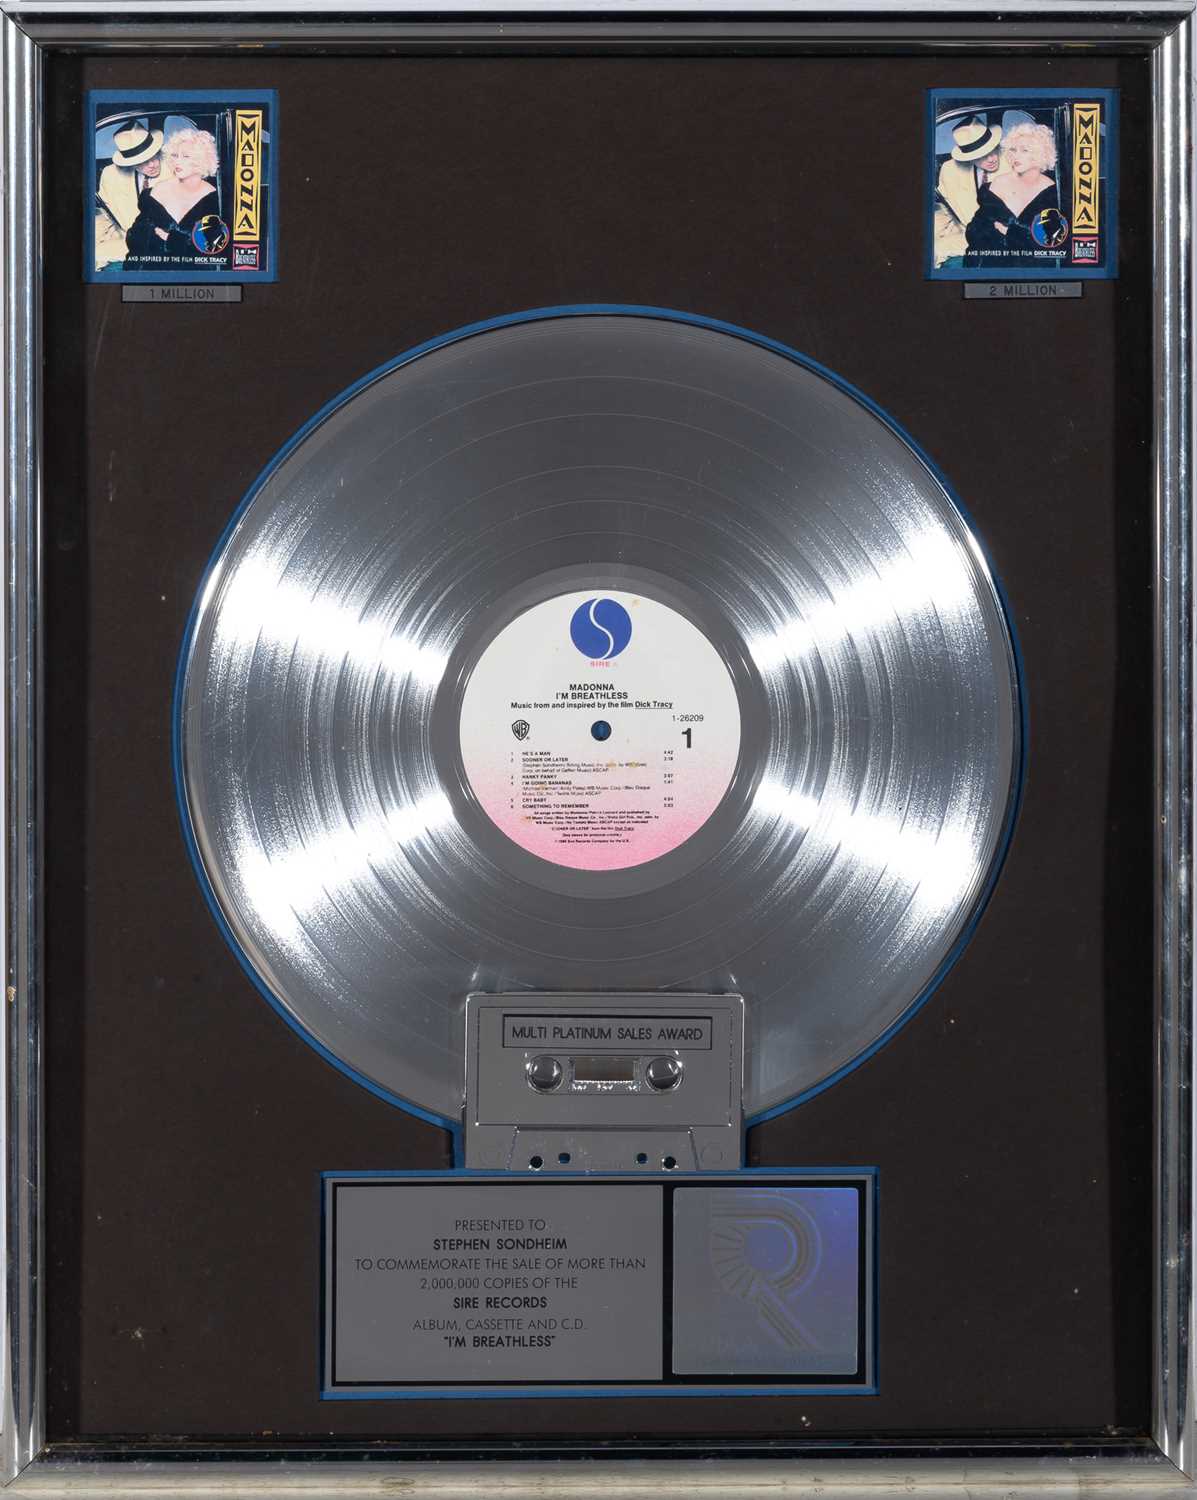 Lot 280 - A platinum sales award for the soundtrack of Dick Tracy